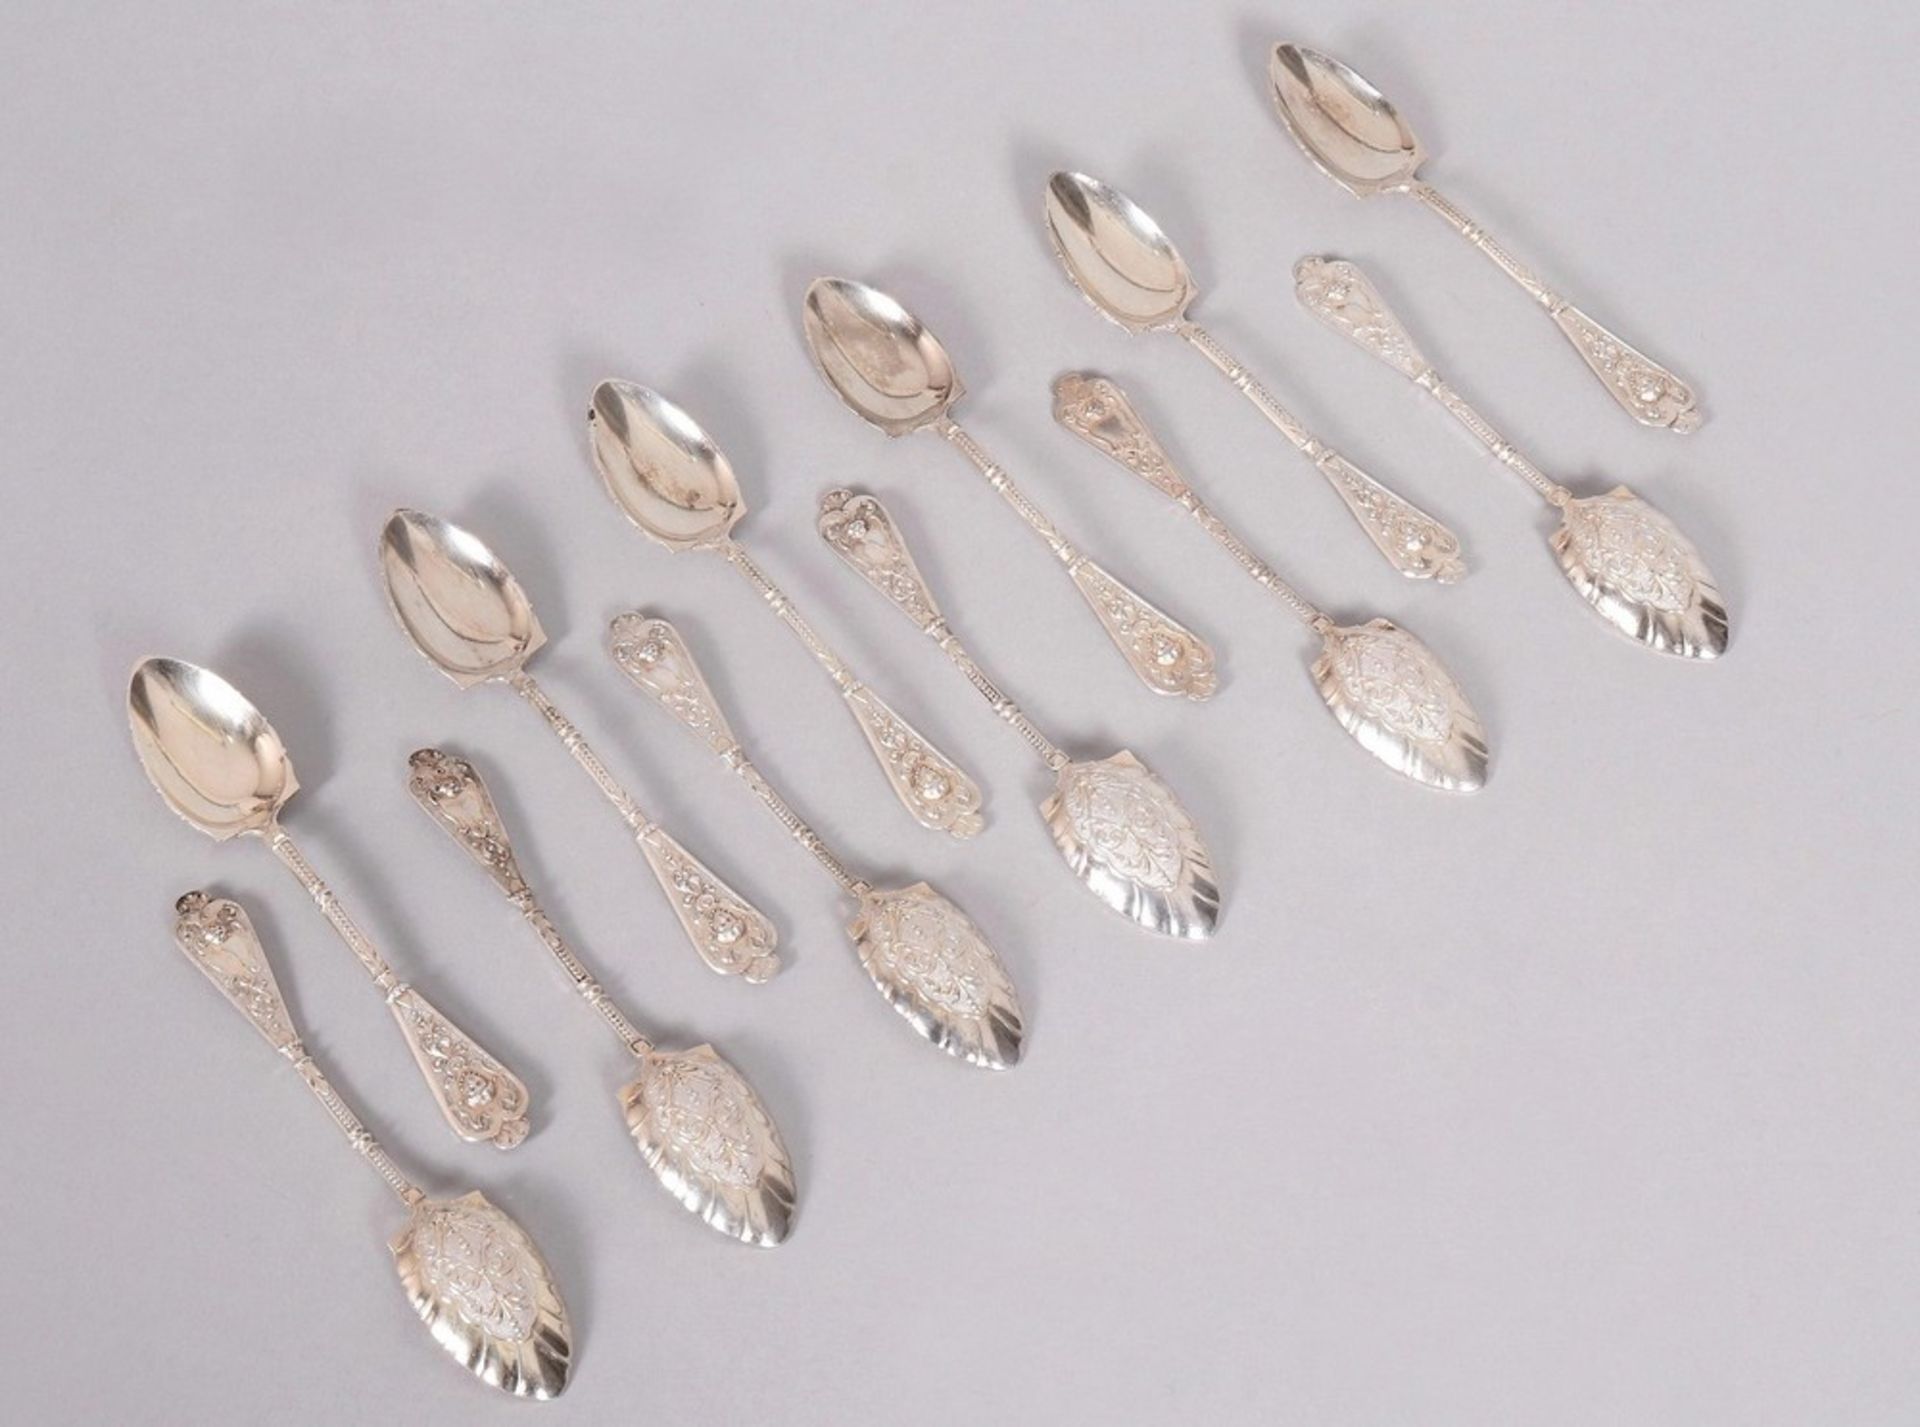 12 small historicism spoons, 800 silver, German, c. 1900